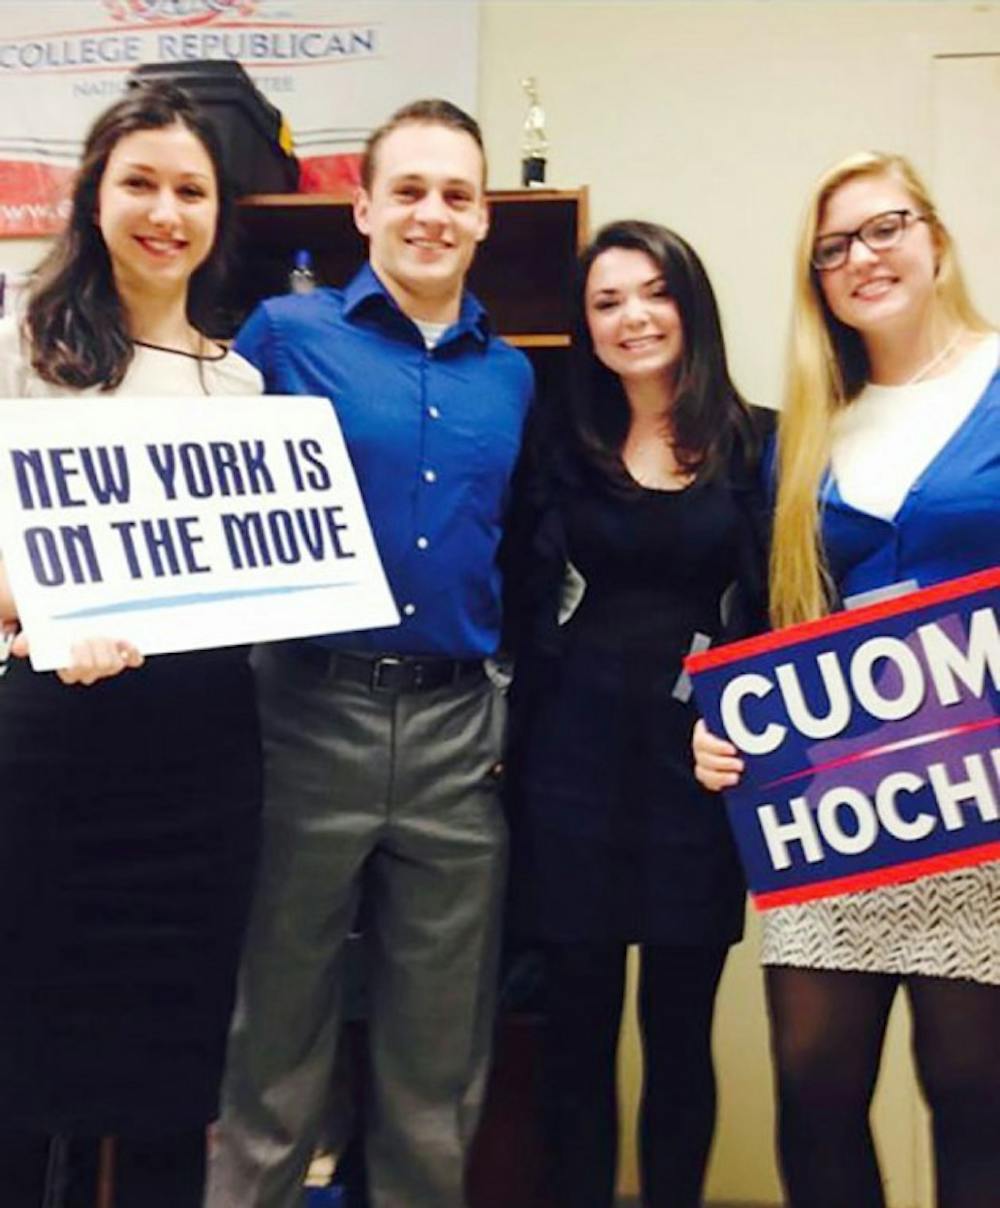 Laura Mannara (far left), president of
College Democrats,&nbsp;went with other members
in her club (Sean Kaczmarek, Melissa Kathan,&nbsp;
and Carly Gottorff) to watch the gubernatorial
debate watch party for Gov. Andrew
Cuomo.&nbsp;Curtosy of Laura Mannara